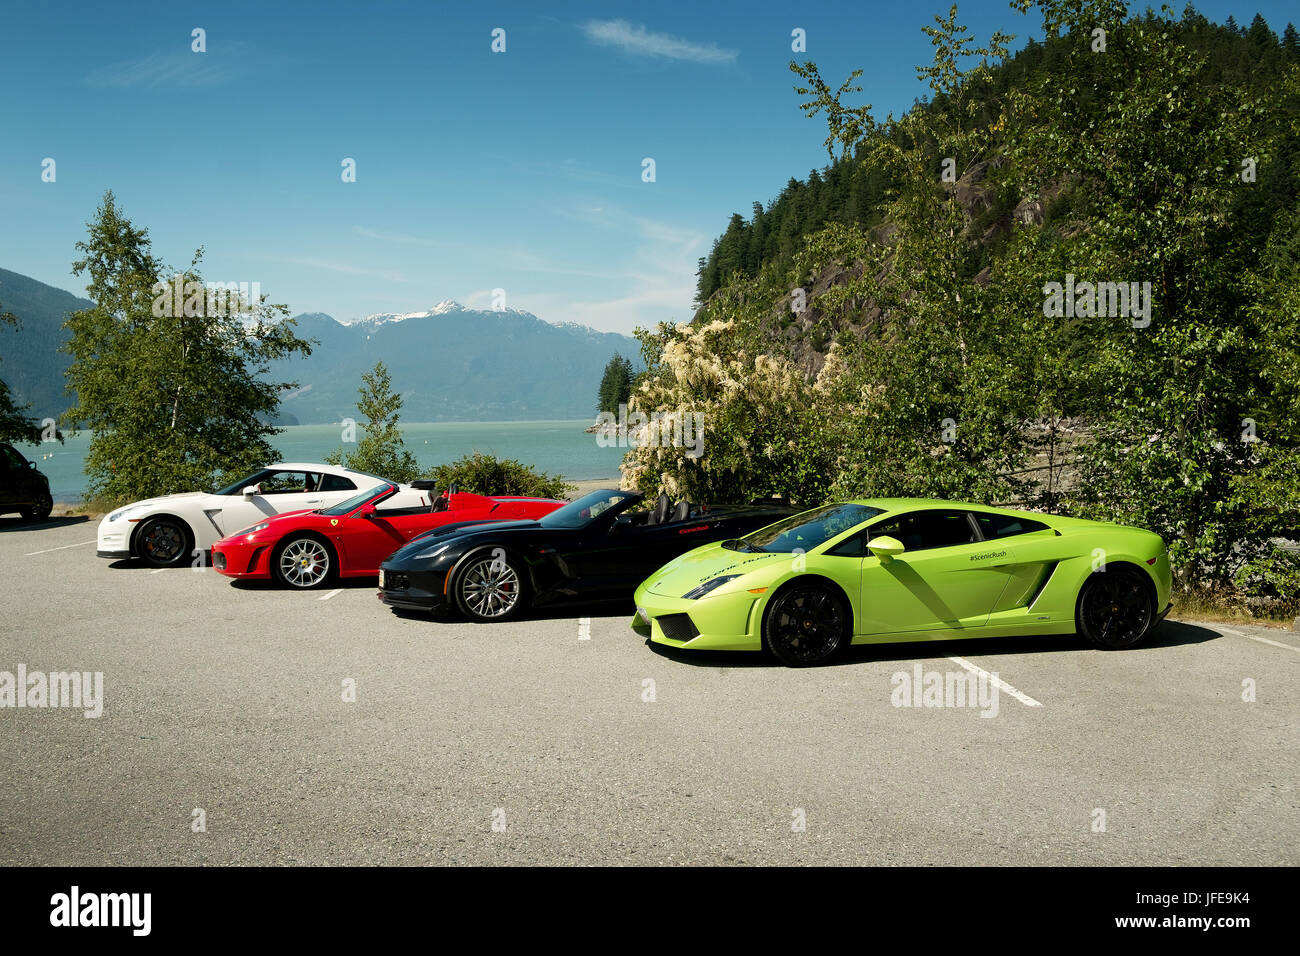 High performance super sports cars parked at Porteau Cove Provincial Park, south of Squamish BC, Canada. Stock Photo